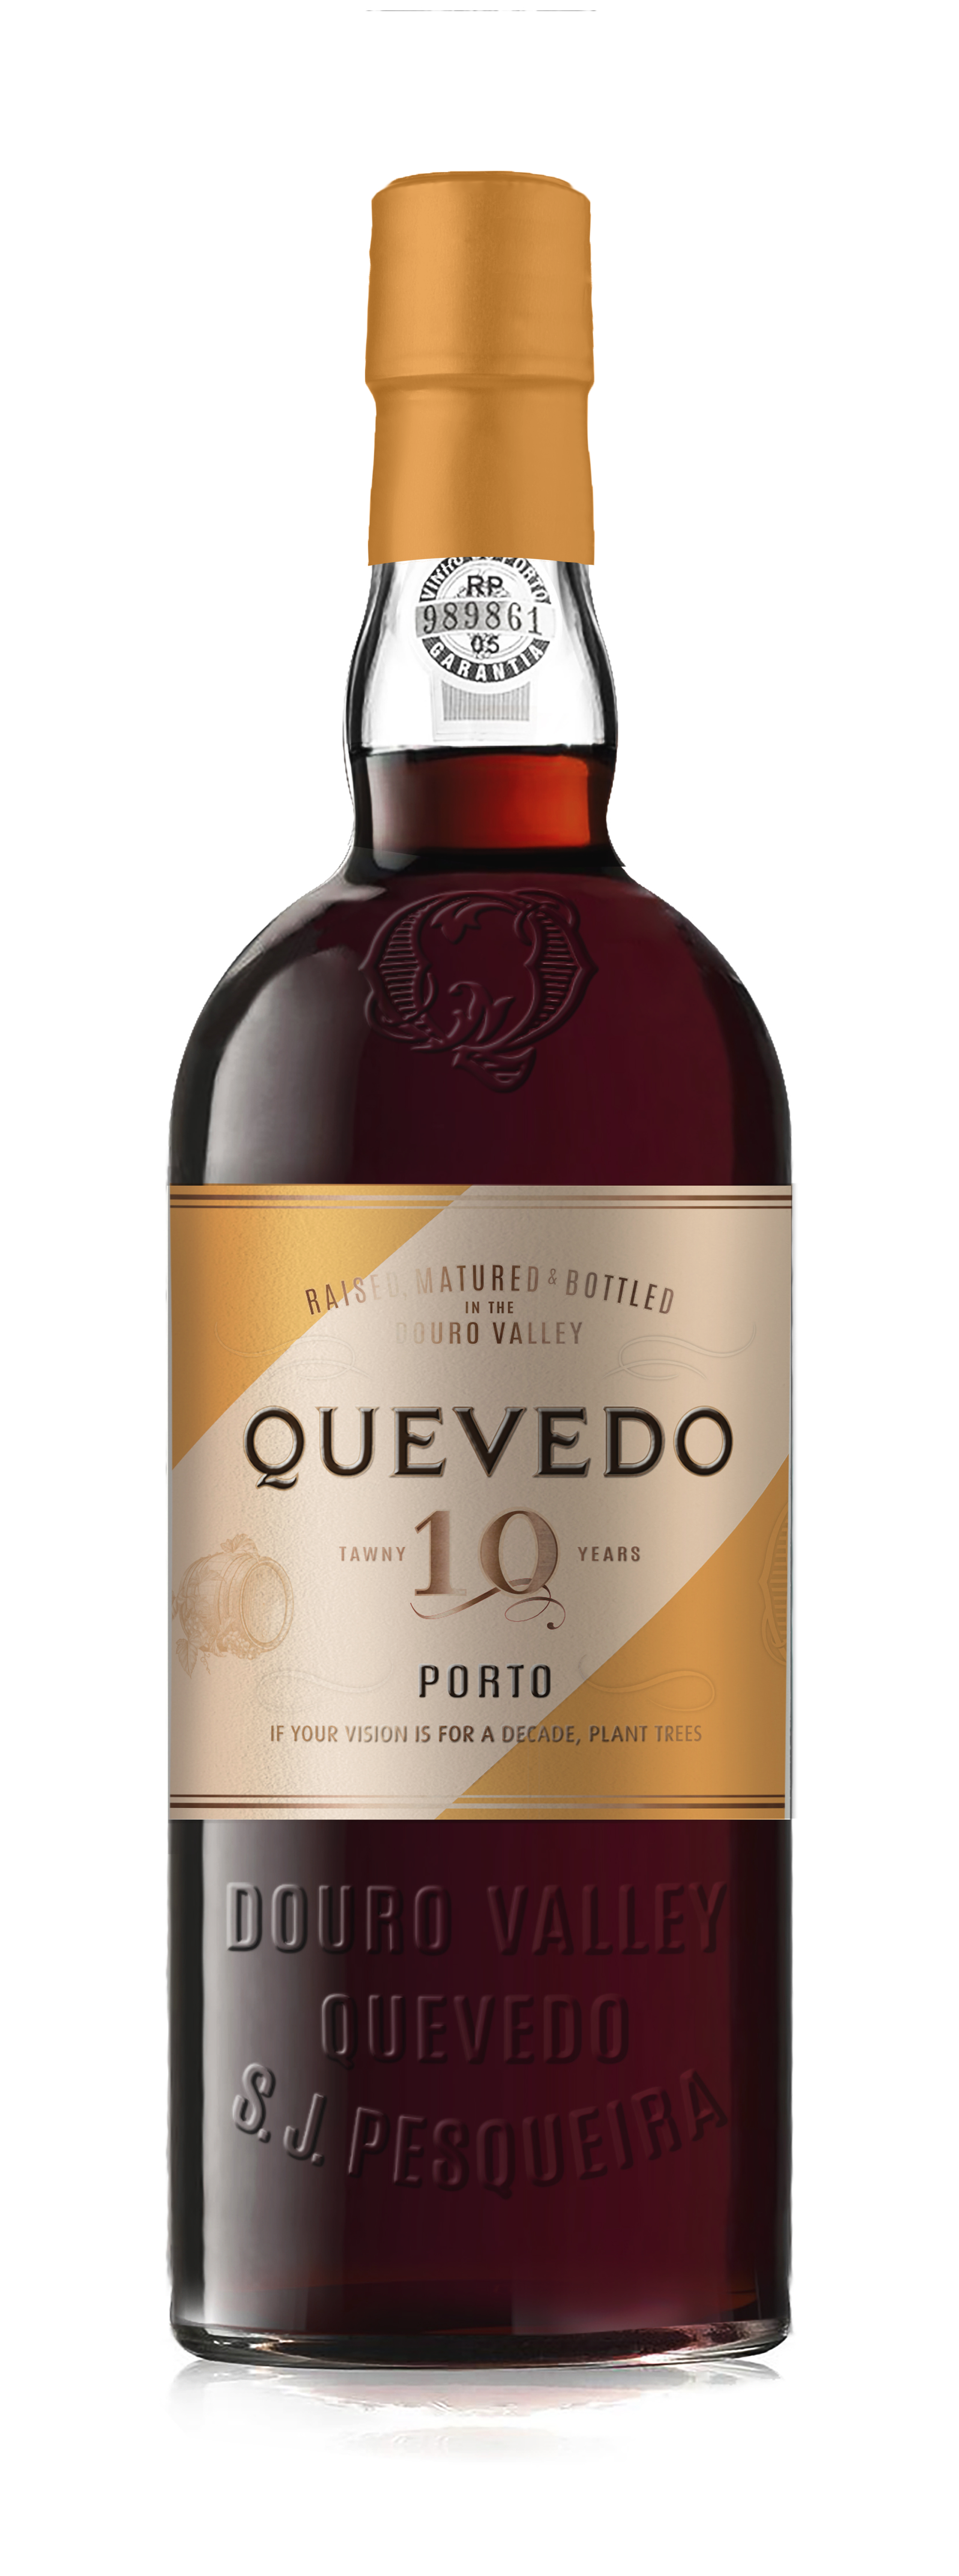 Quevedo 10 Year Old Tawny Port 0,375l Flasche 